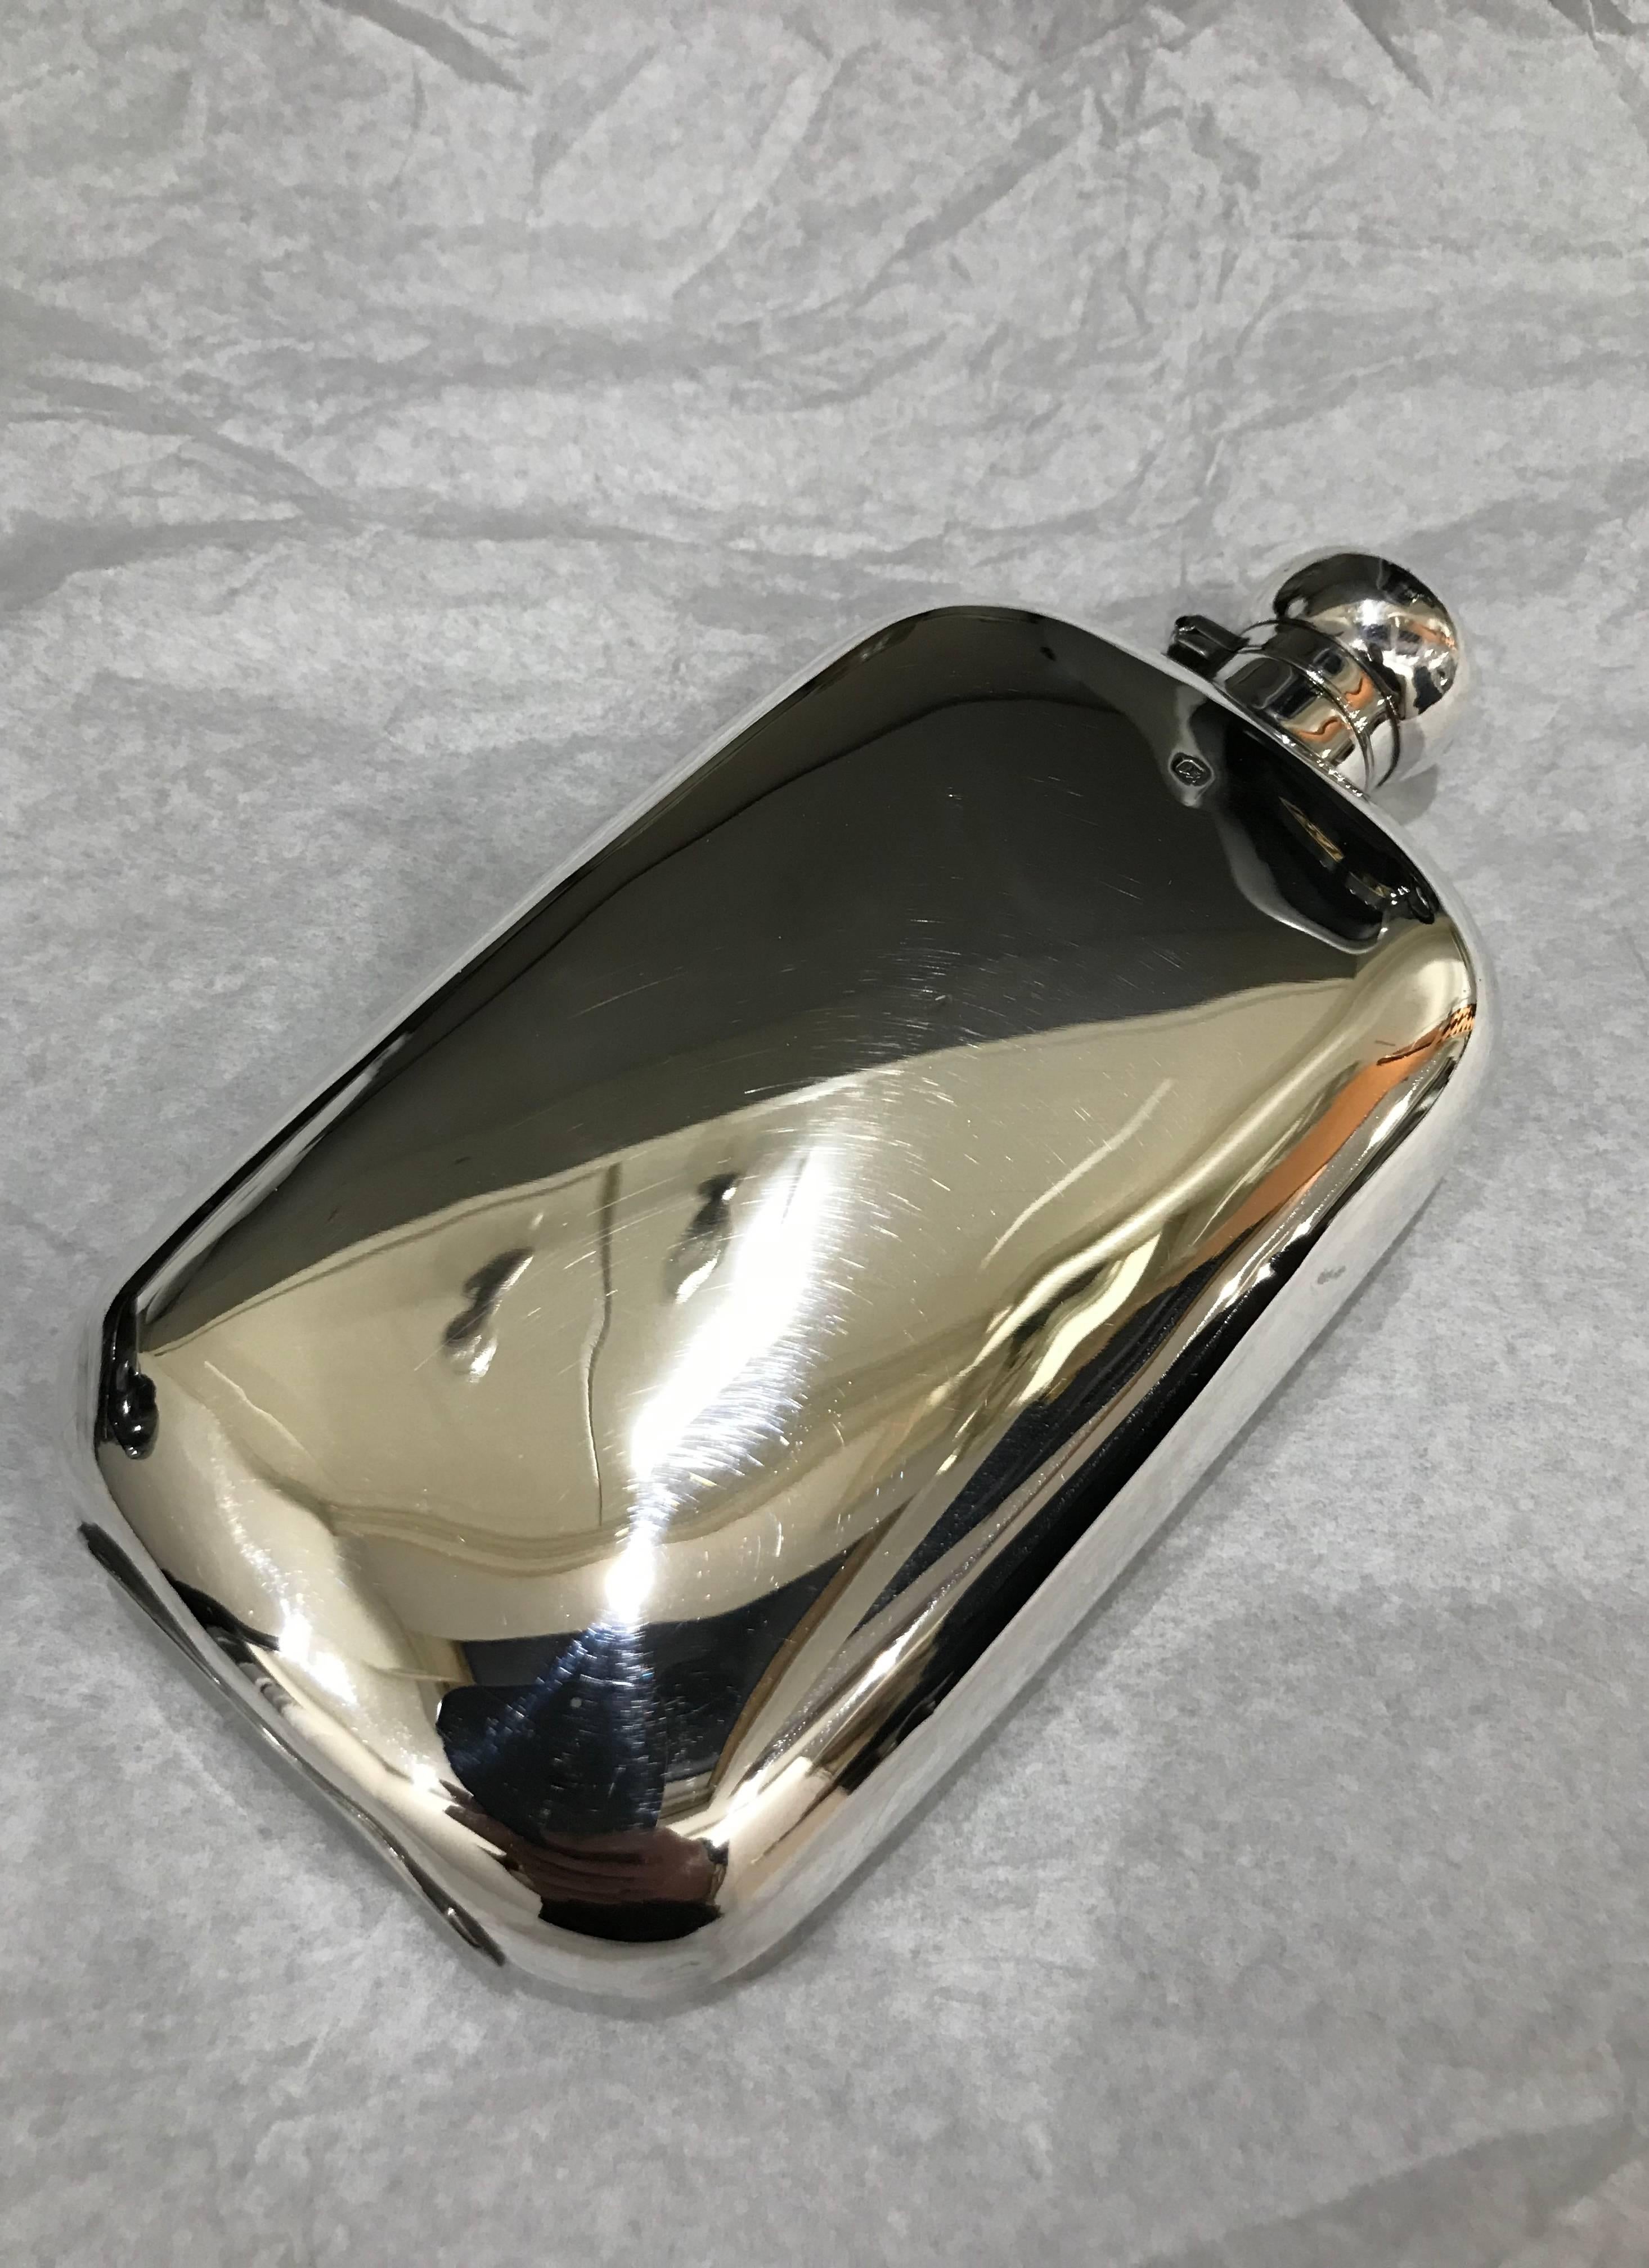 Silver hall marked hip or pocket flask, James Dixon & Sons, 1896

A lovely piece the flask has a curved shape with no sharp corners, making it ideal to keep in the hip pocket, the lid is hinged with a screw grip.

The flask is in very good